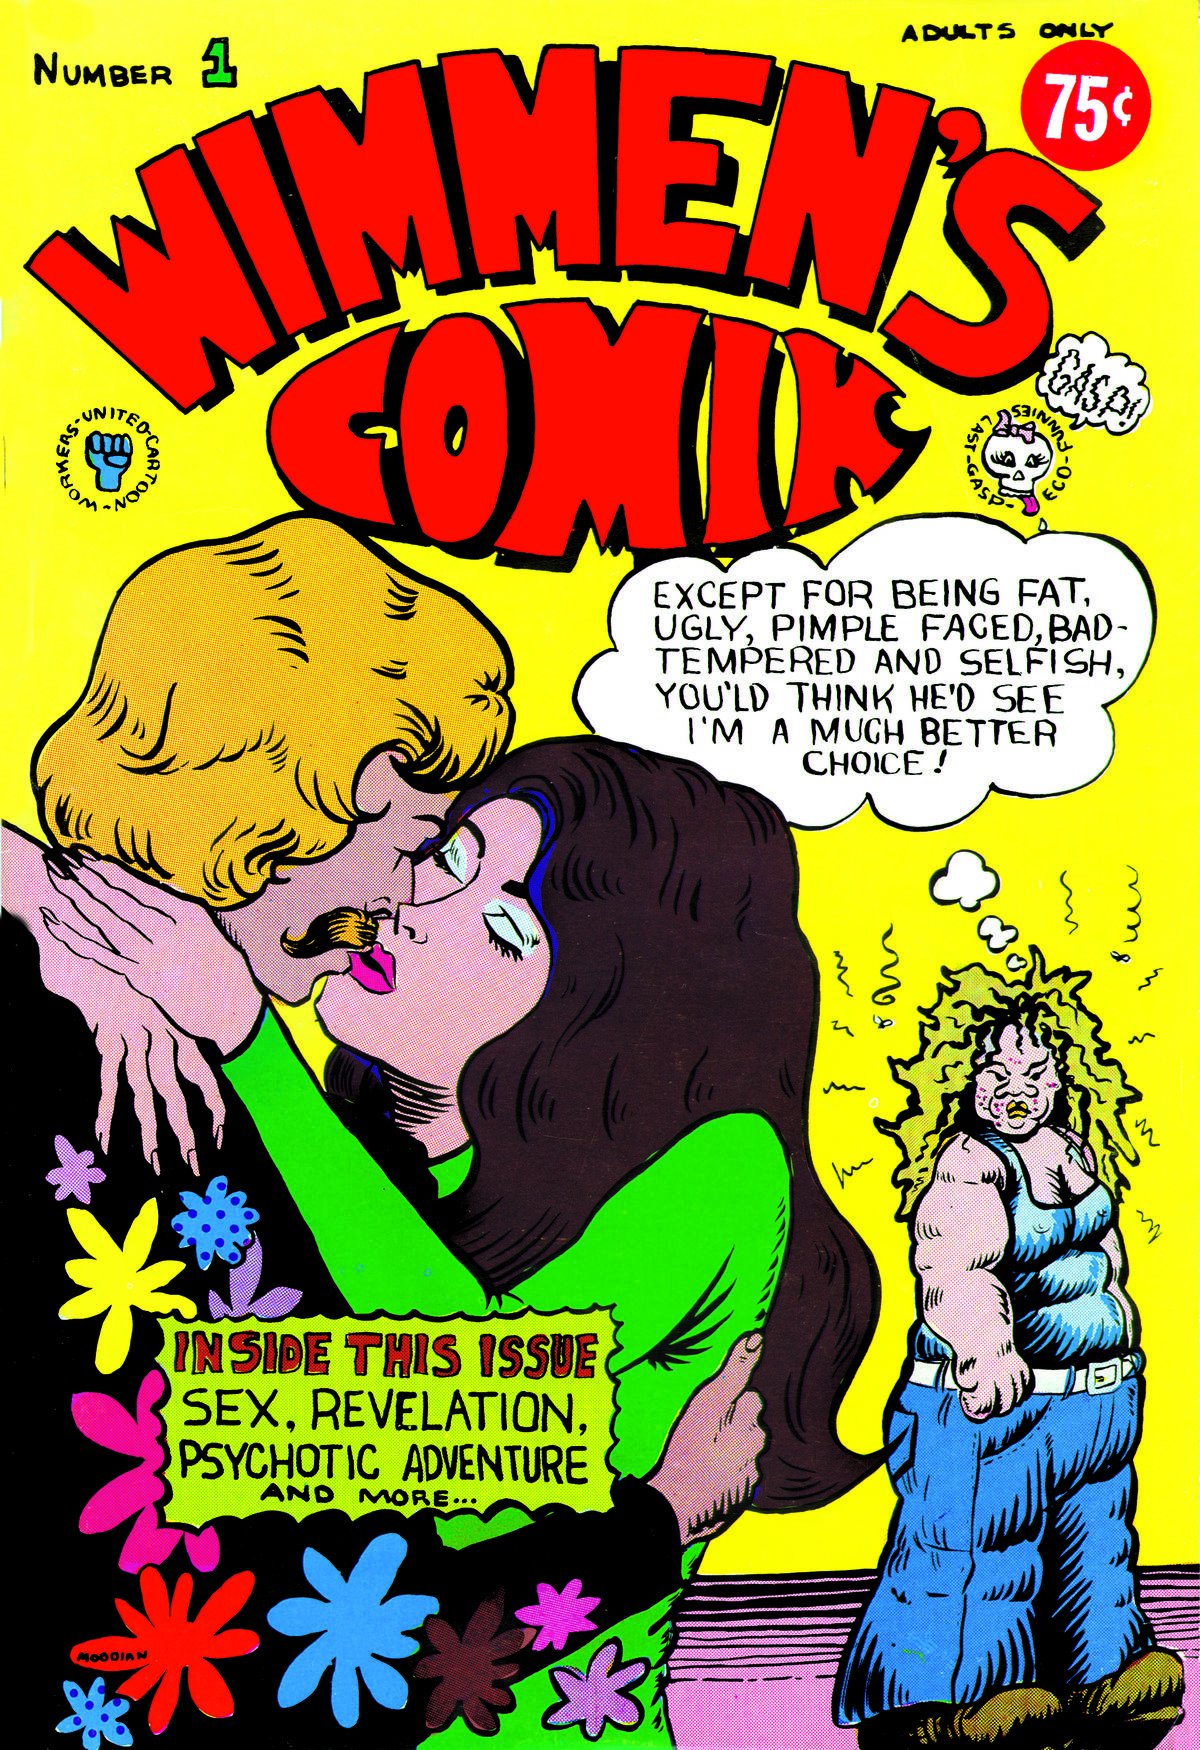 The Irreverent, Feminist Comic Book That Fought Chauvinism - Artsy